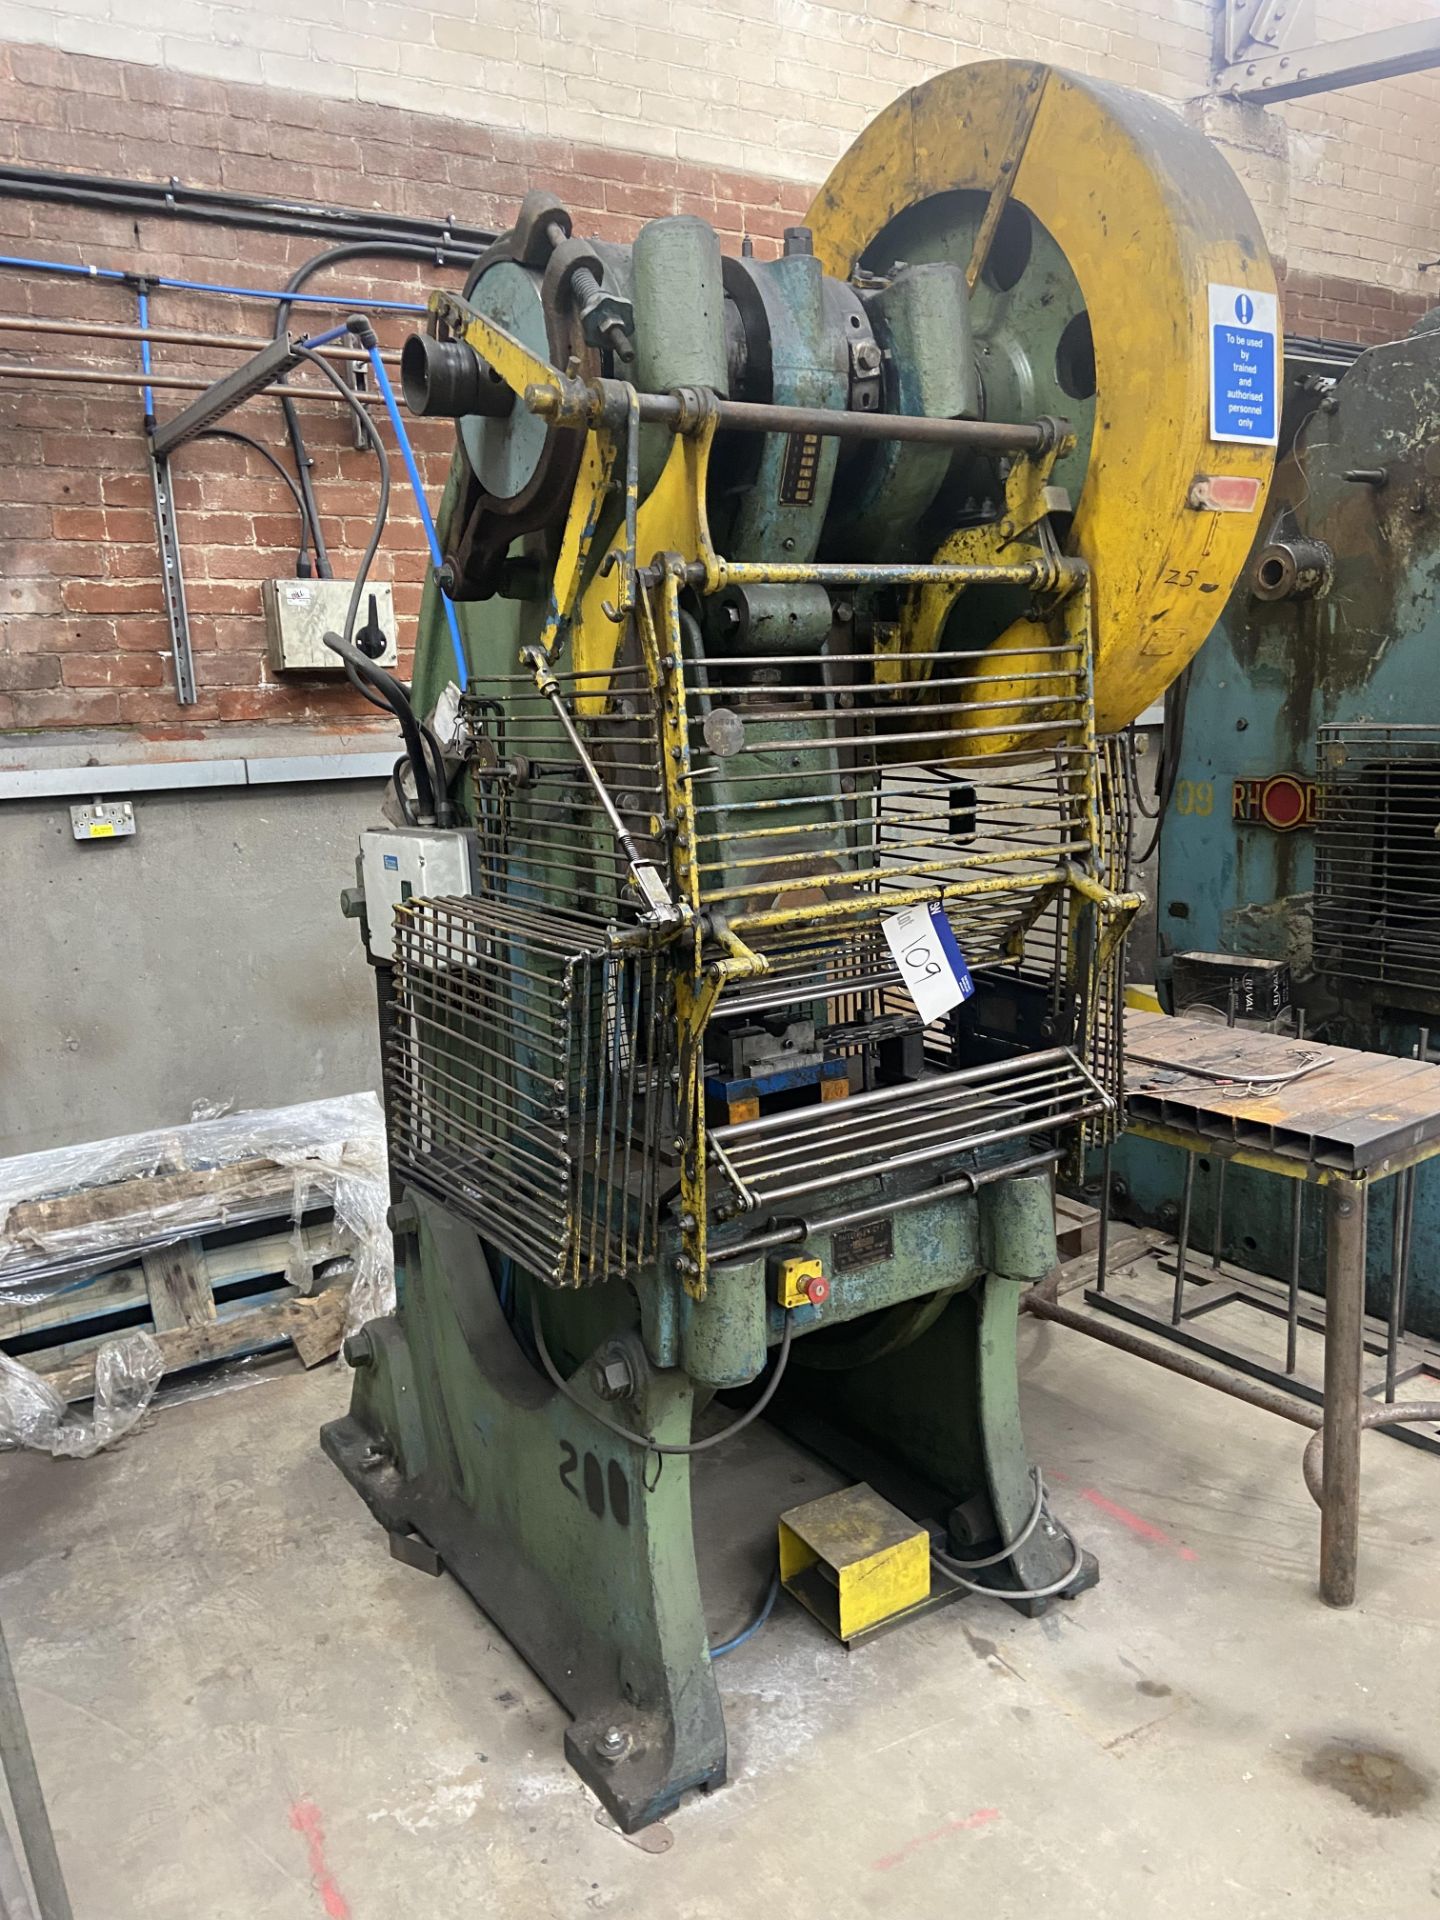 Butterley 50ton Inclinable Power Press, serial no. 77534, with platen approx. 700mm x 450mm Please